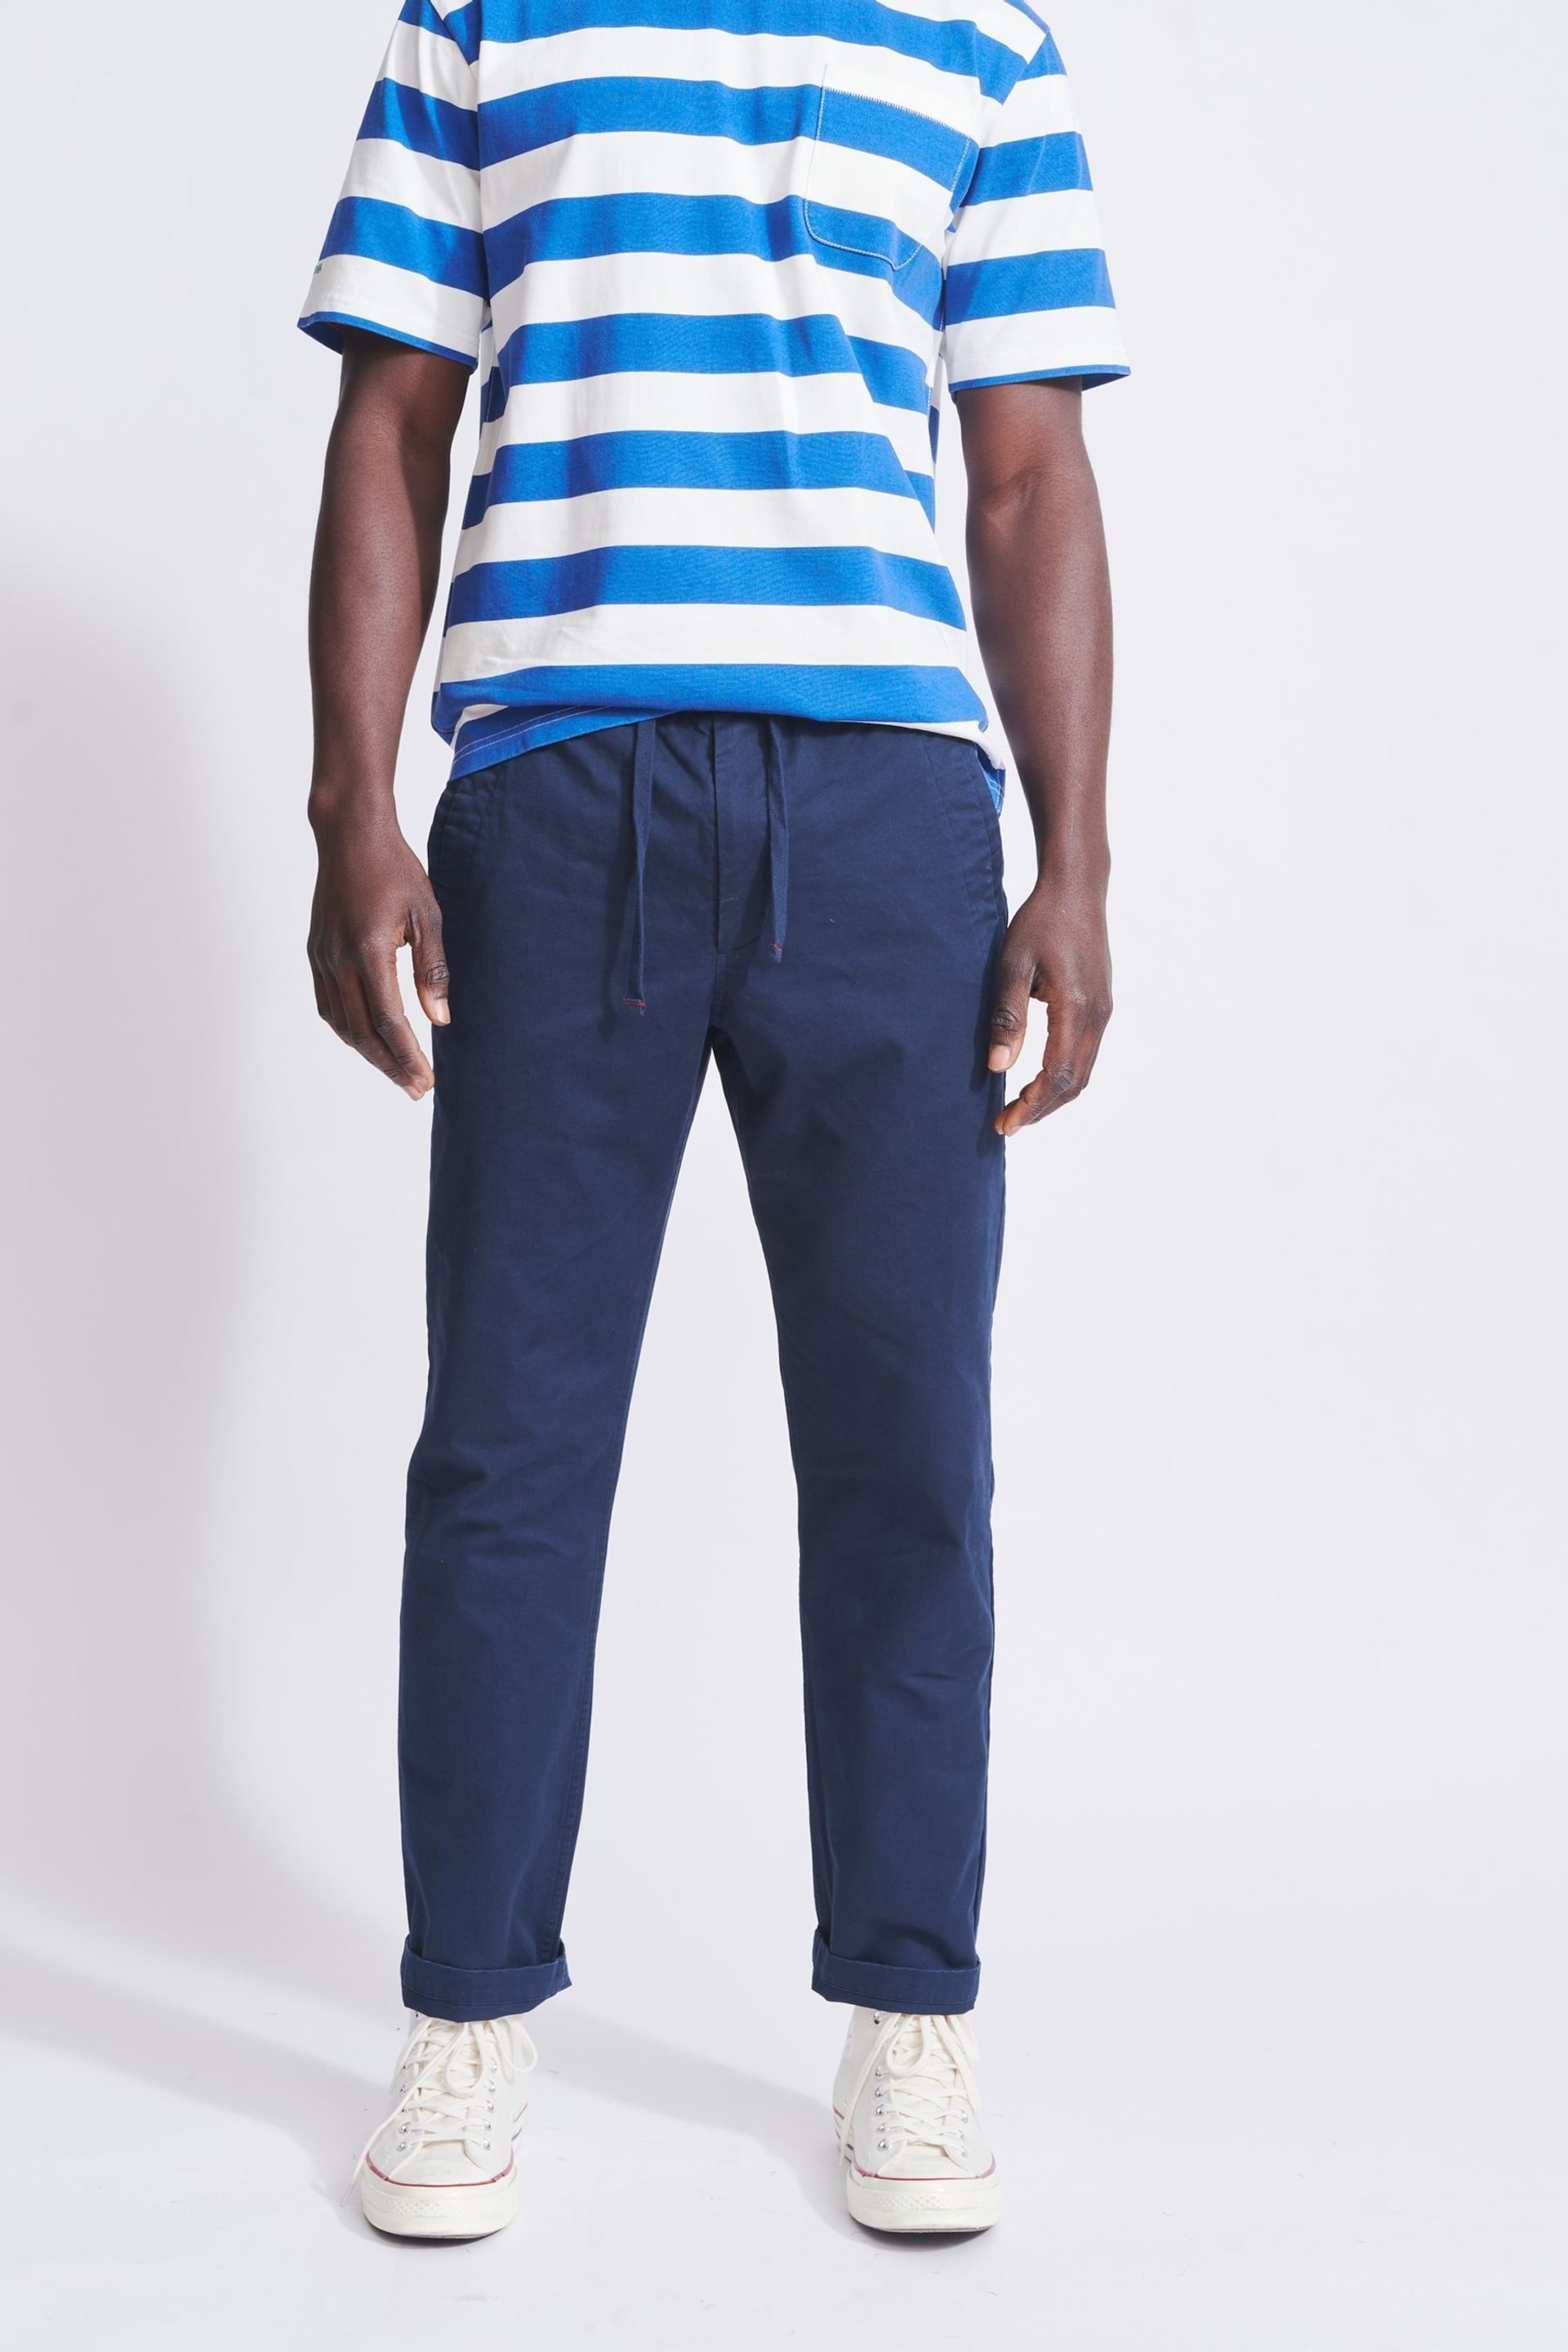 Aubin Ulceby Rugby Trousers - Image 1 of 6